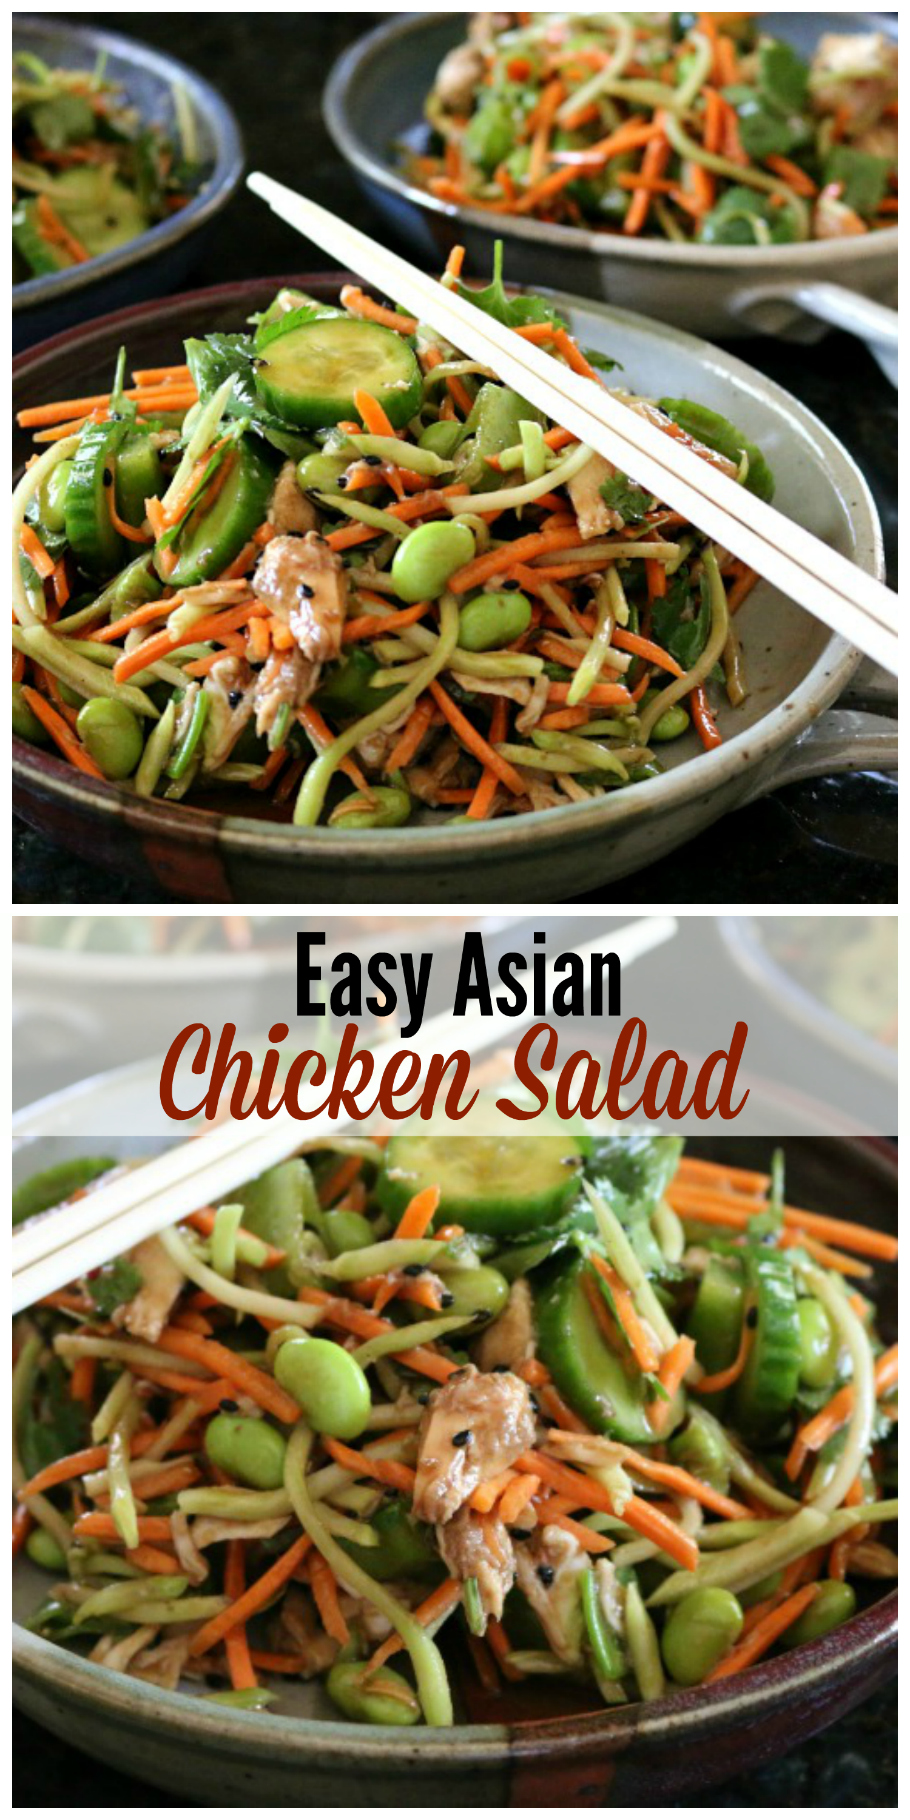 Easy Asian Chicken Salad, make this recipe in just minutes. Simple and Healthy, you can beat that! 